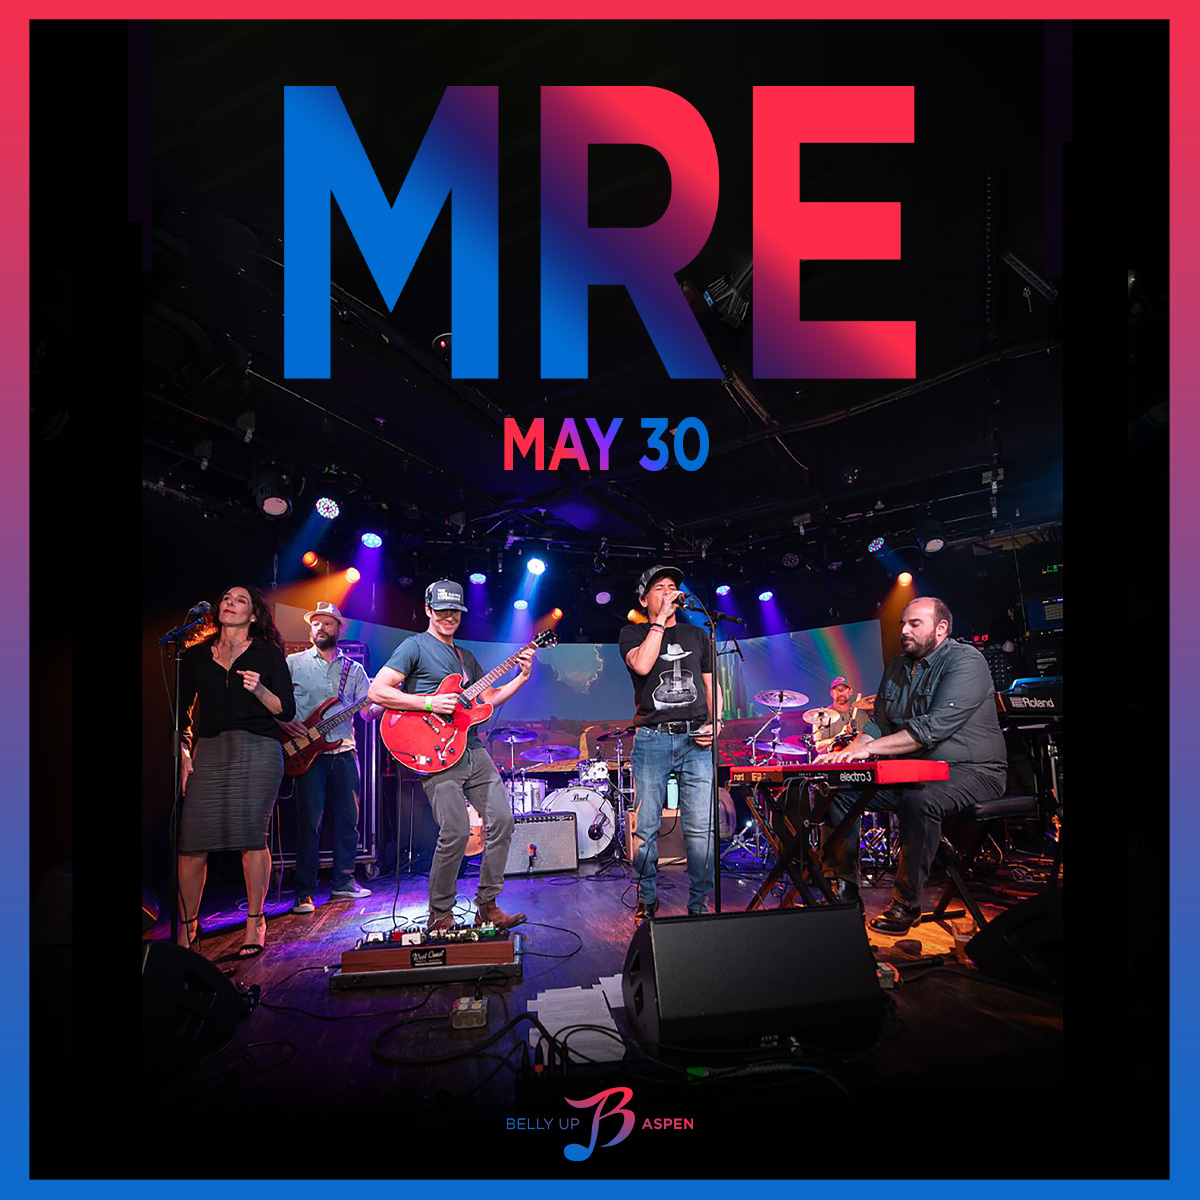 Local cover band MRE returns 5/30! Presale starts Thu, 5/2 @ 10am MT. Sign up by 8:30am MT 5/2 to receive the presale code: bit.ly/3W7woV8